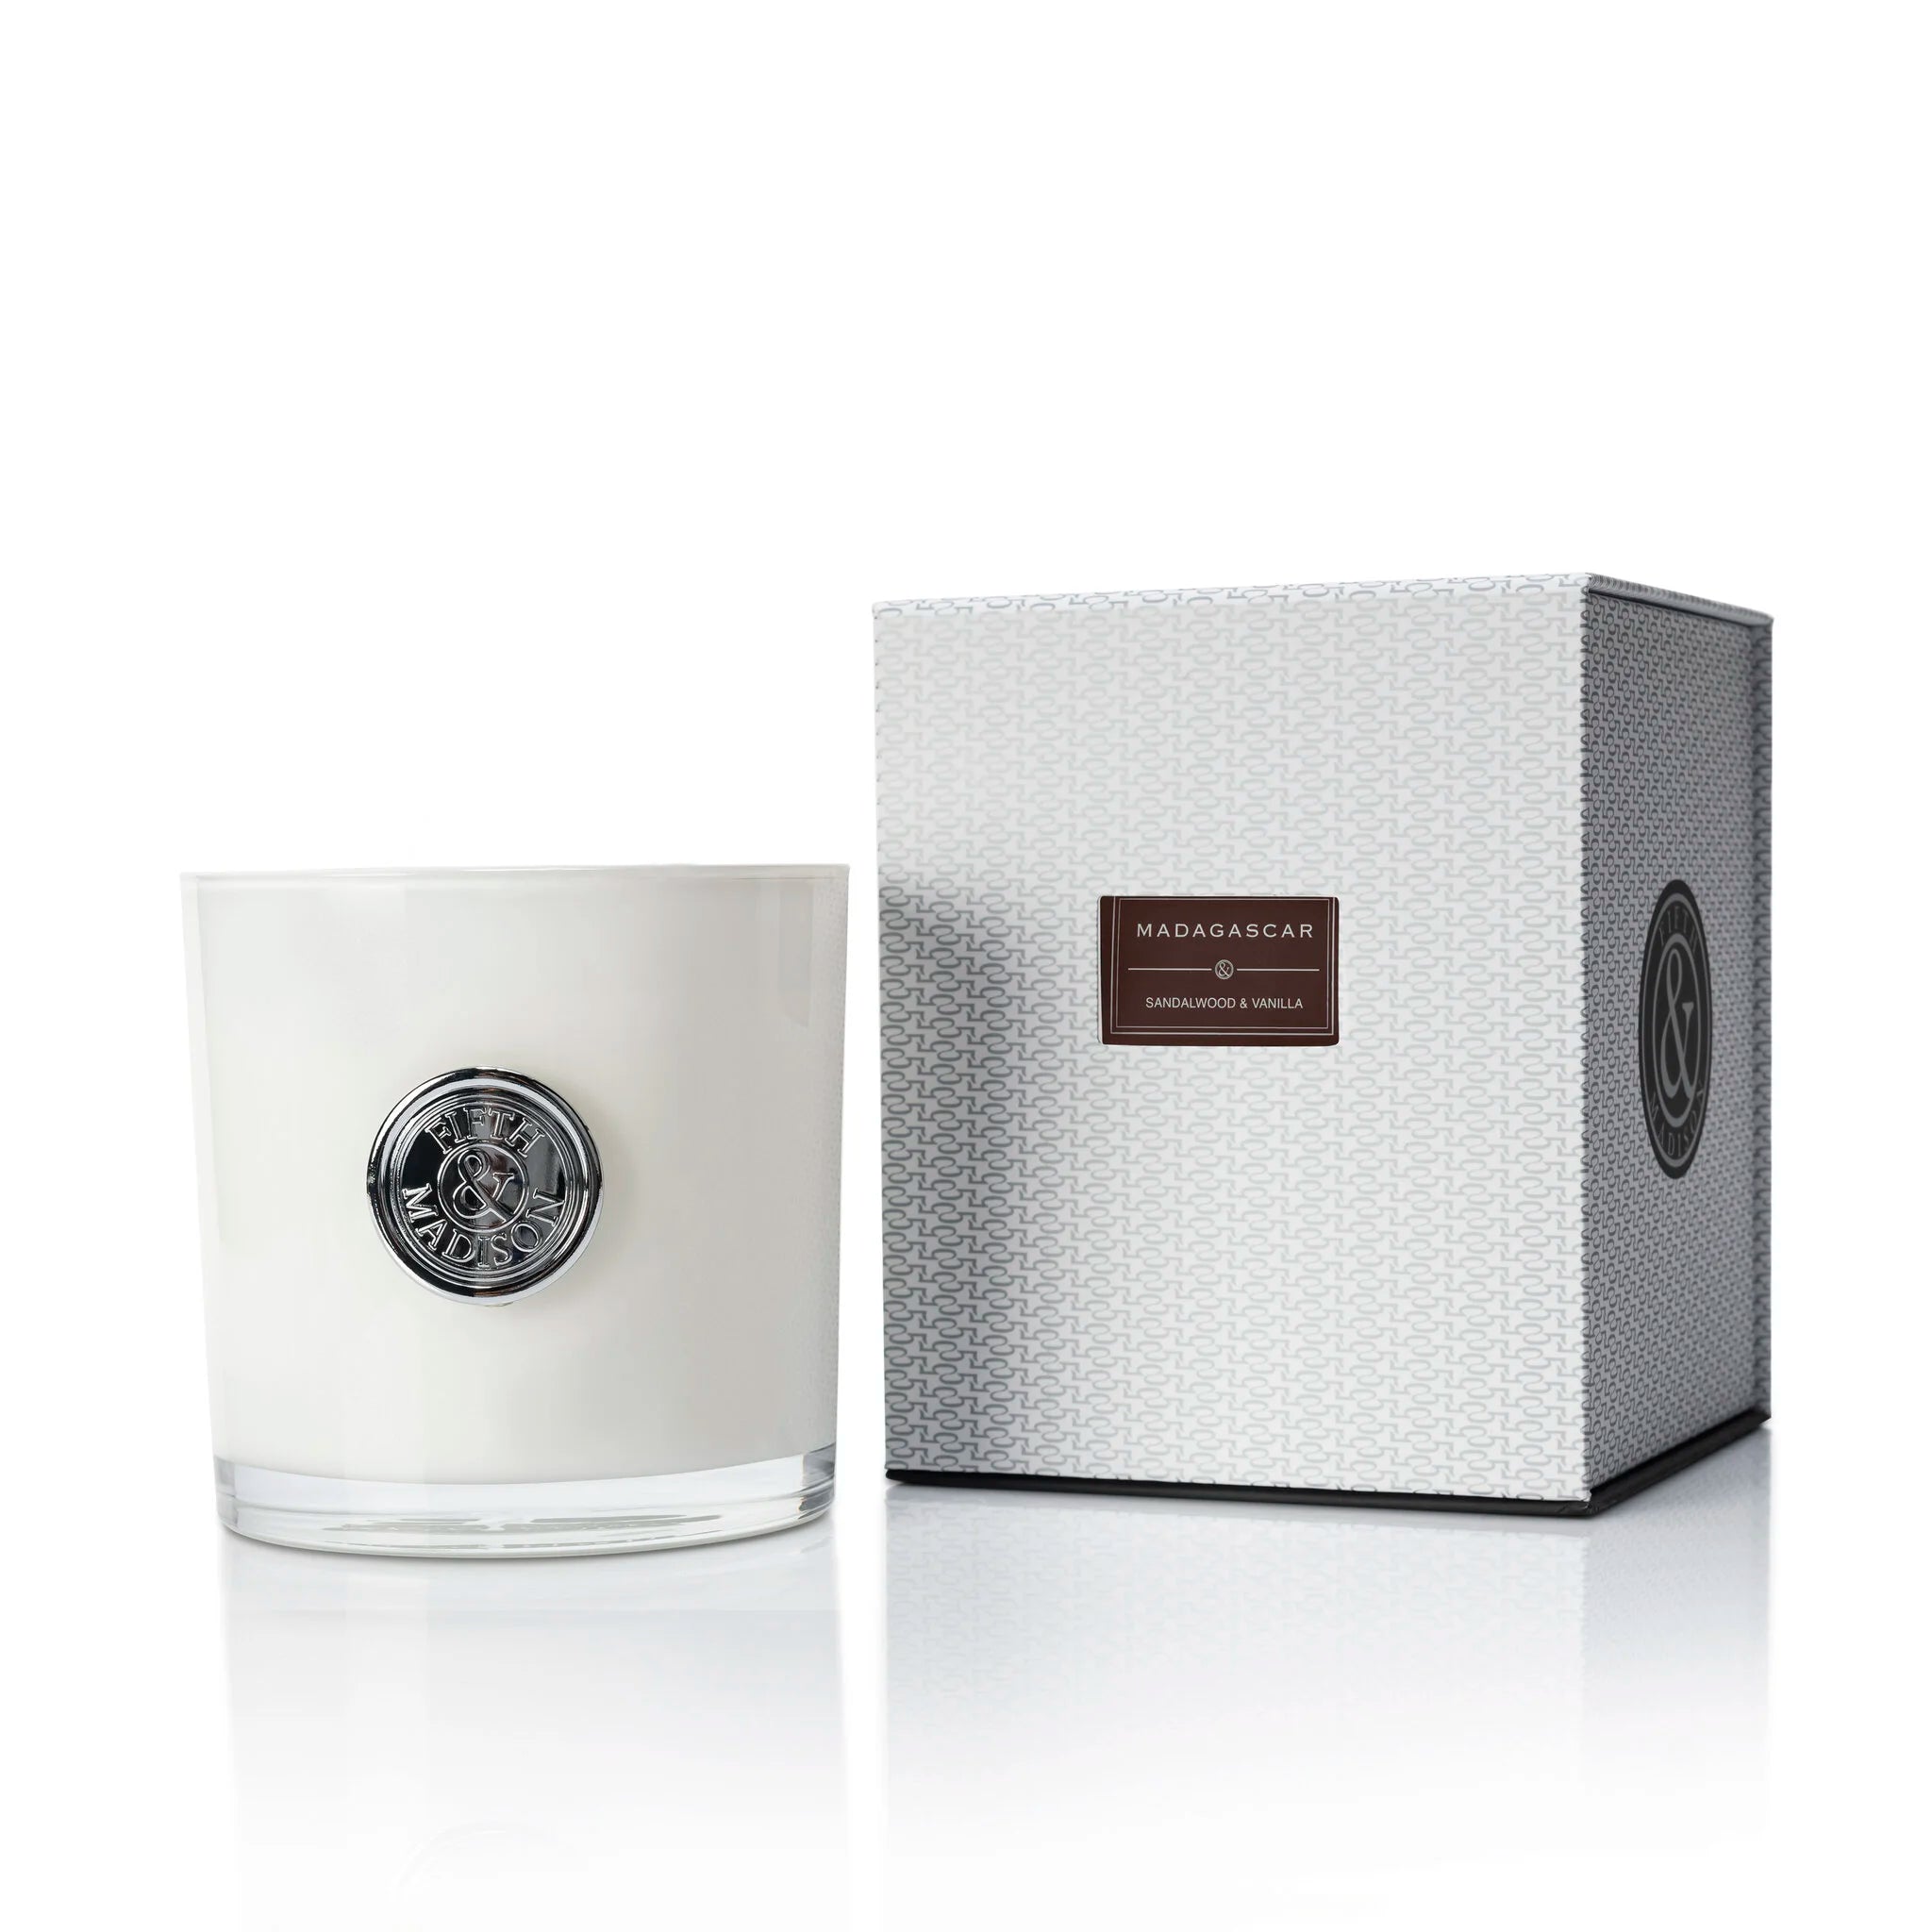 Madagascar Gramercy Penthouse Triple Wick Candle